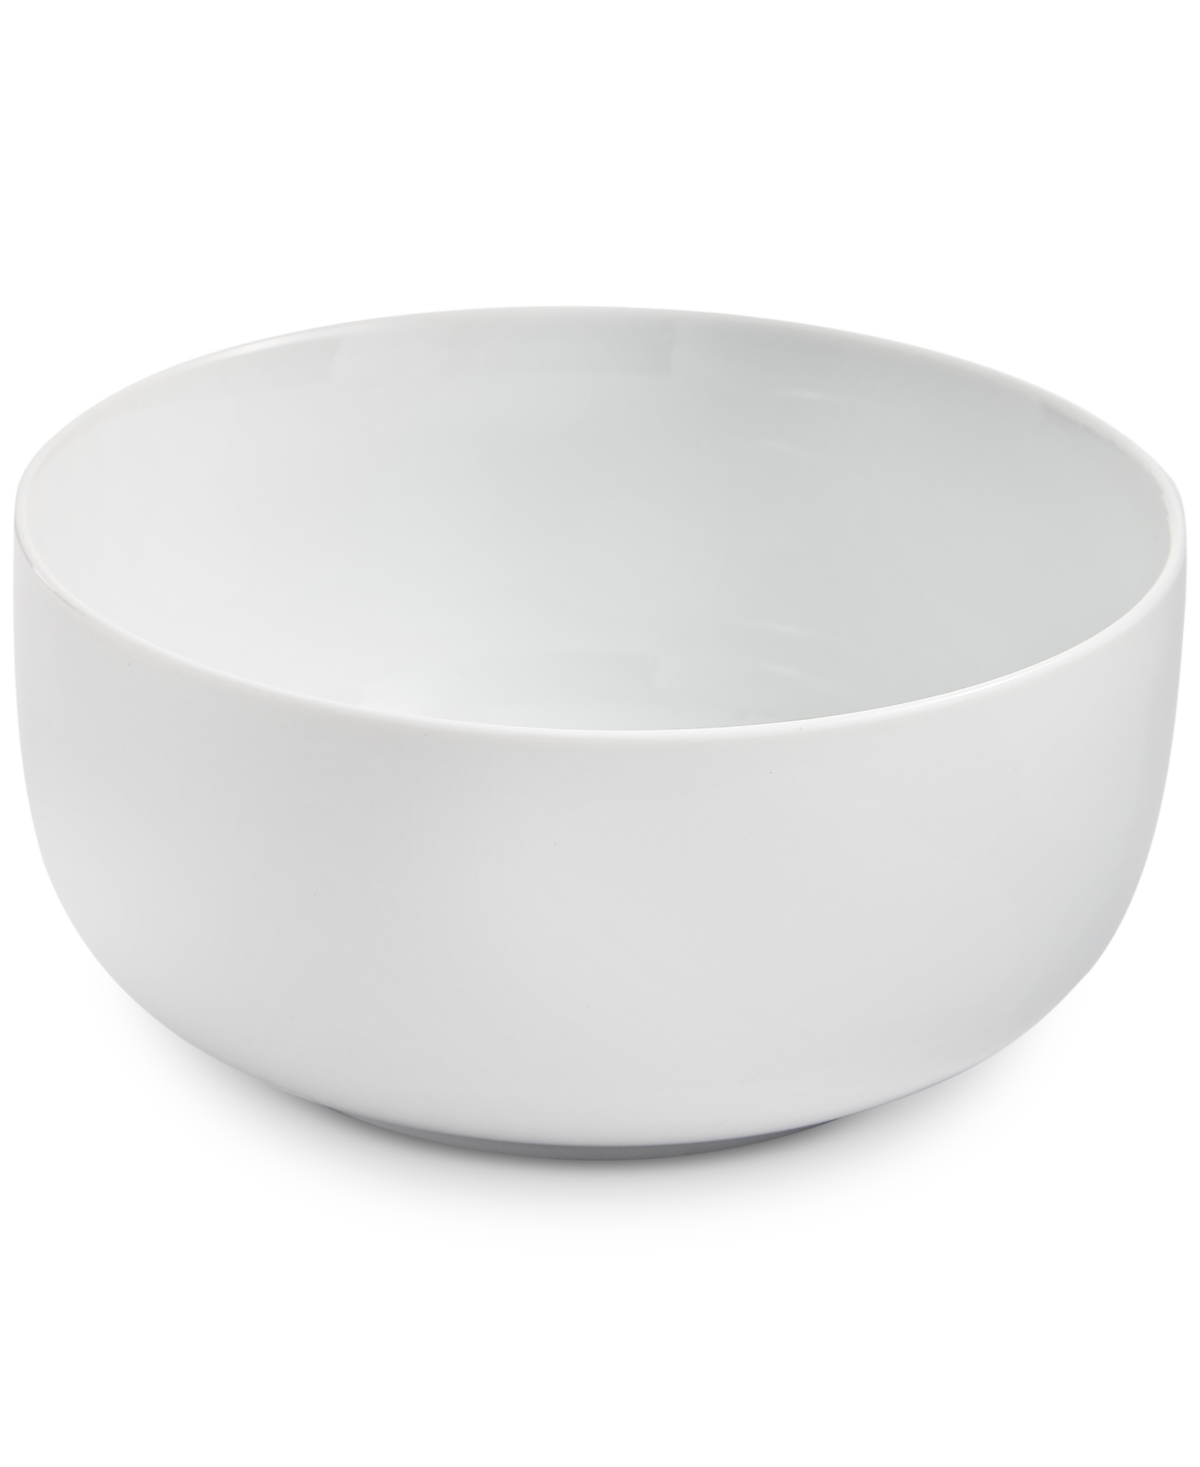 Noodle Bowl, Created for Macy's - White